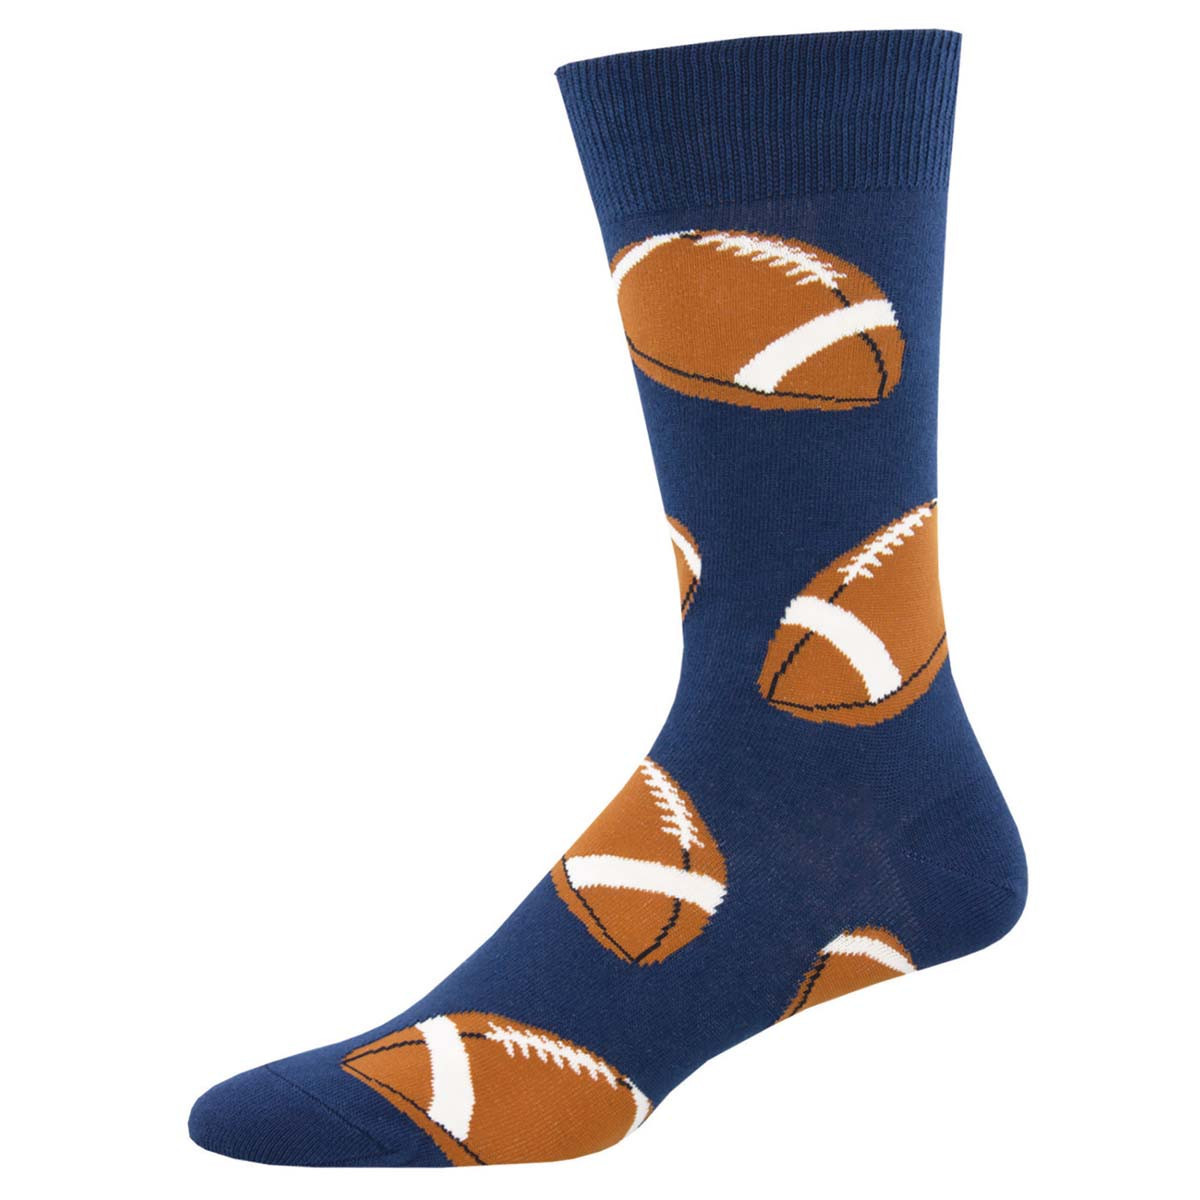 Football Pigskin One Size Fits Most Navy Mens Socks - Sunset Key Chains